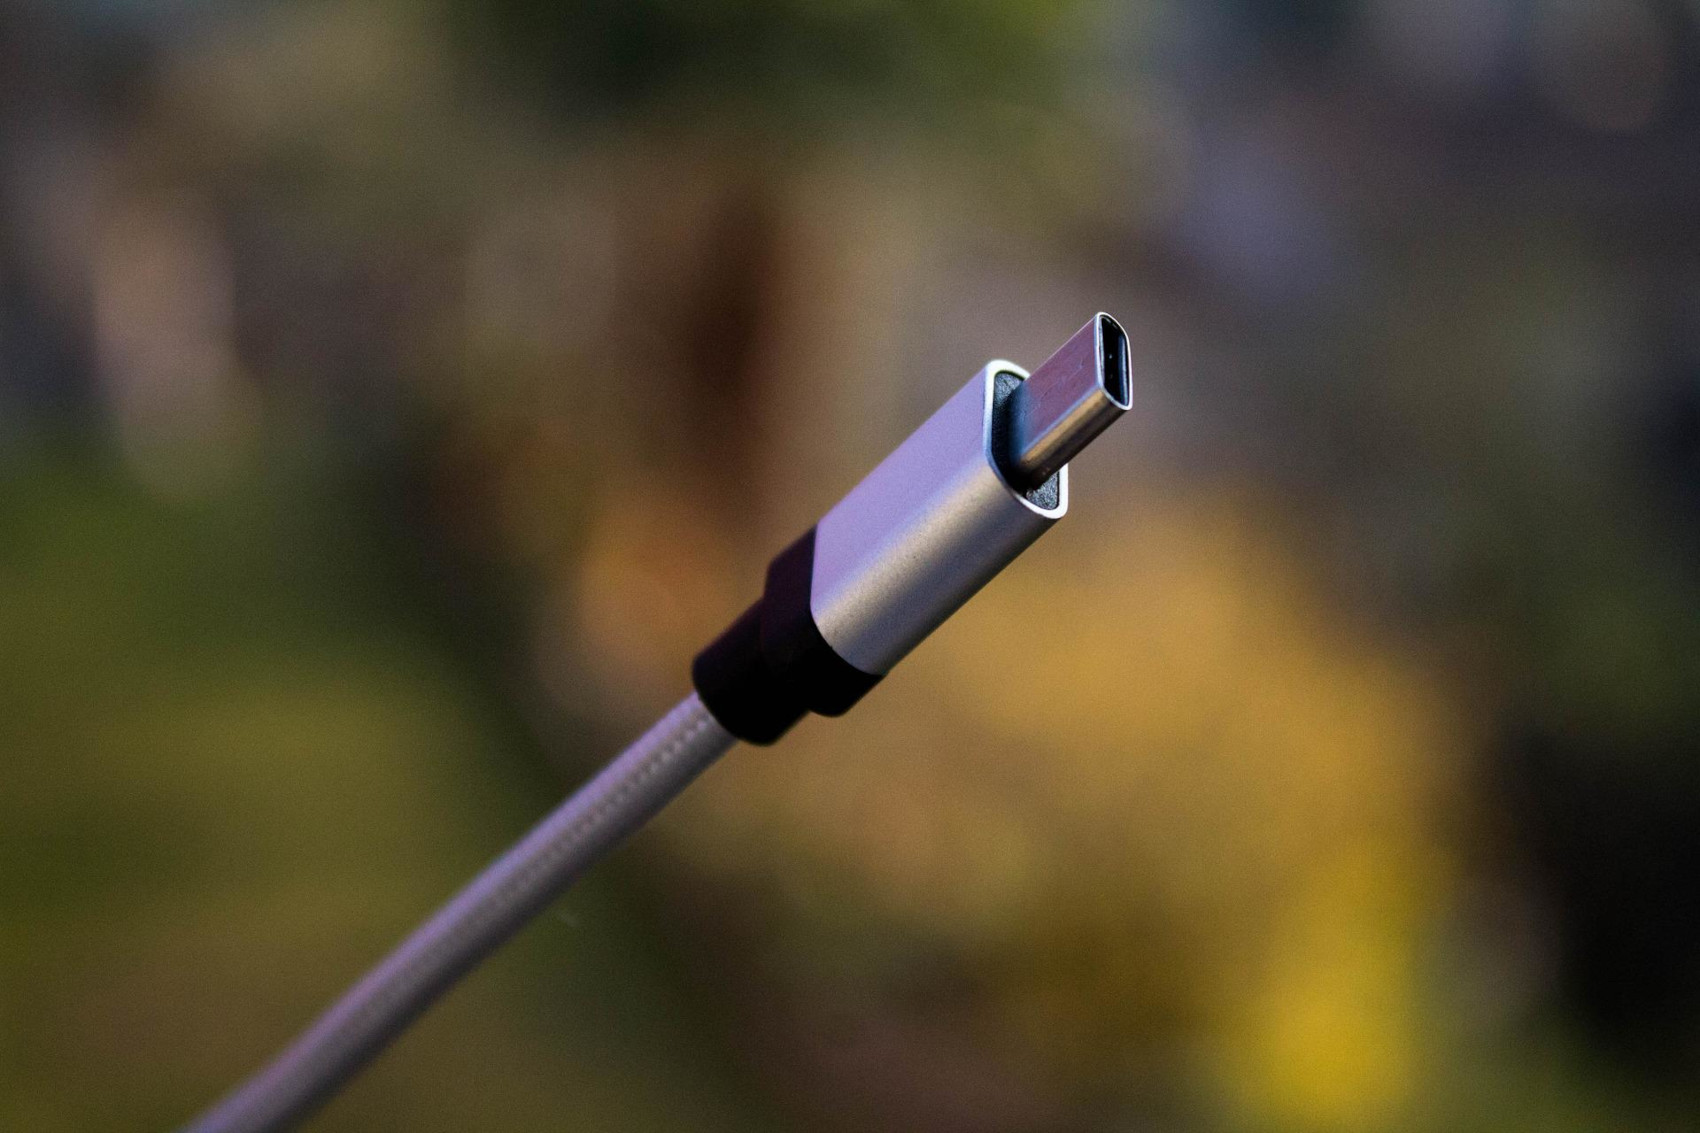 USB-C Cable - Image by Denys Vitali